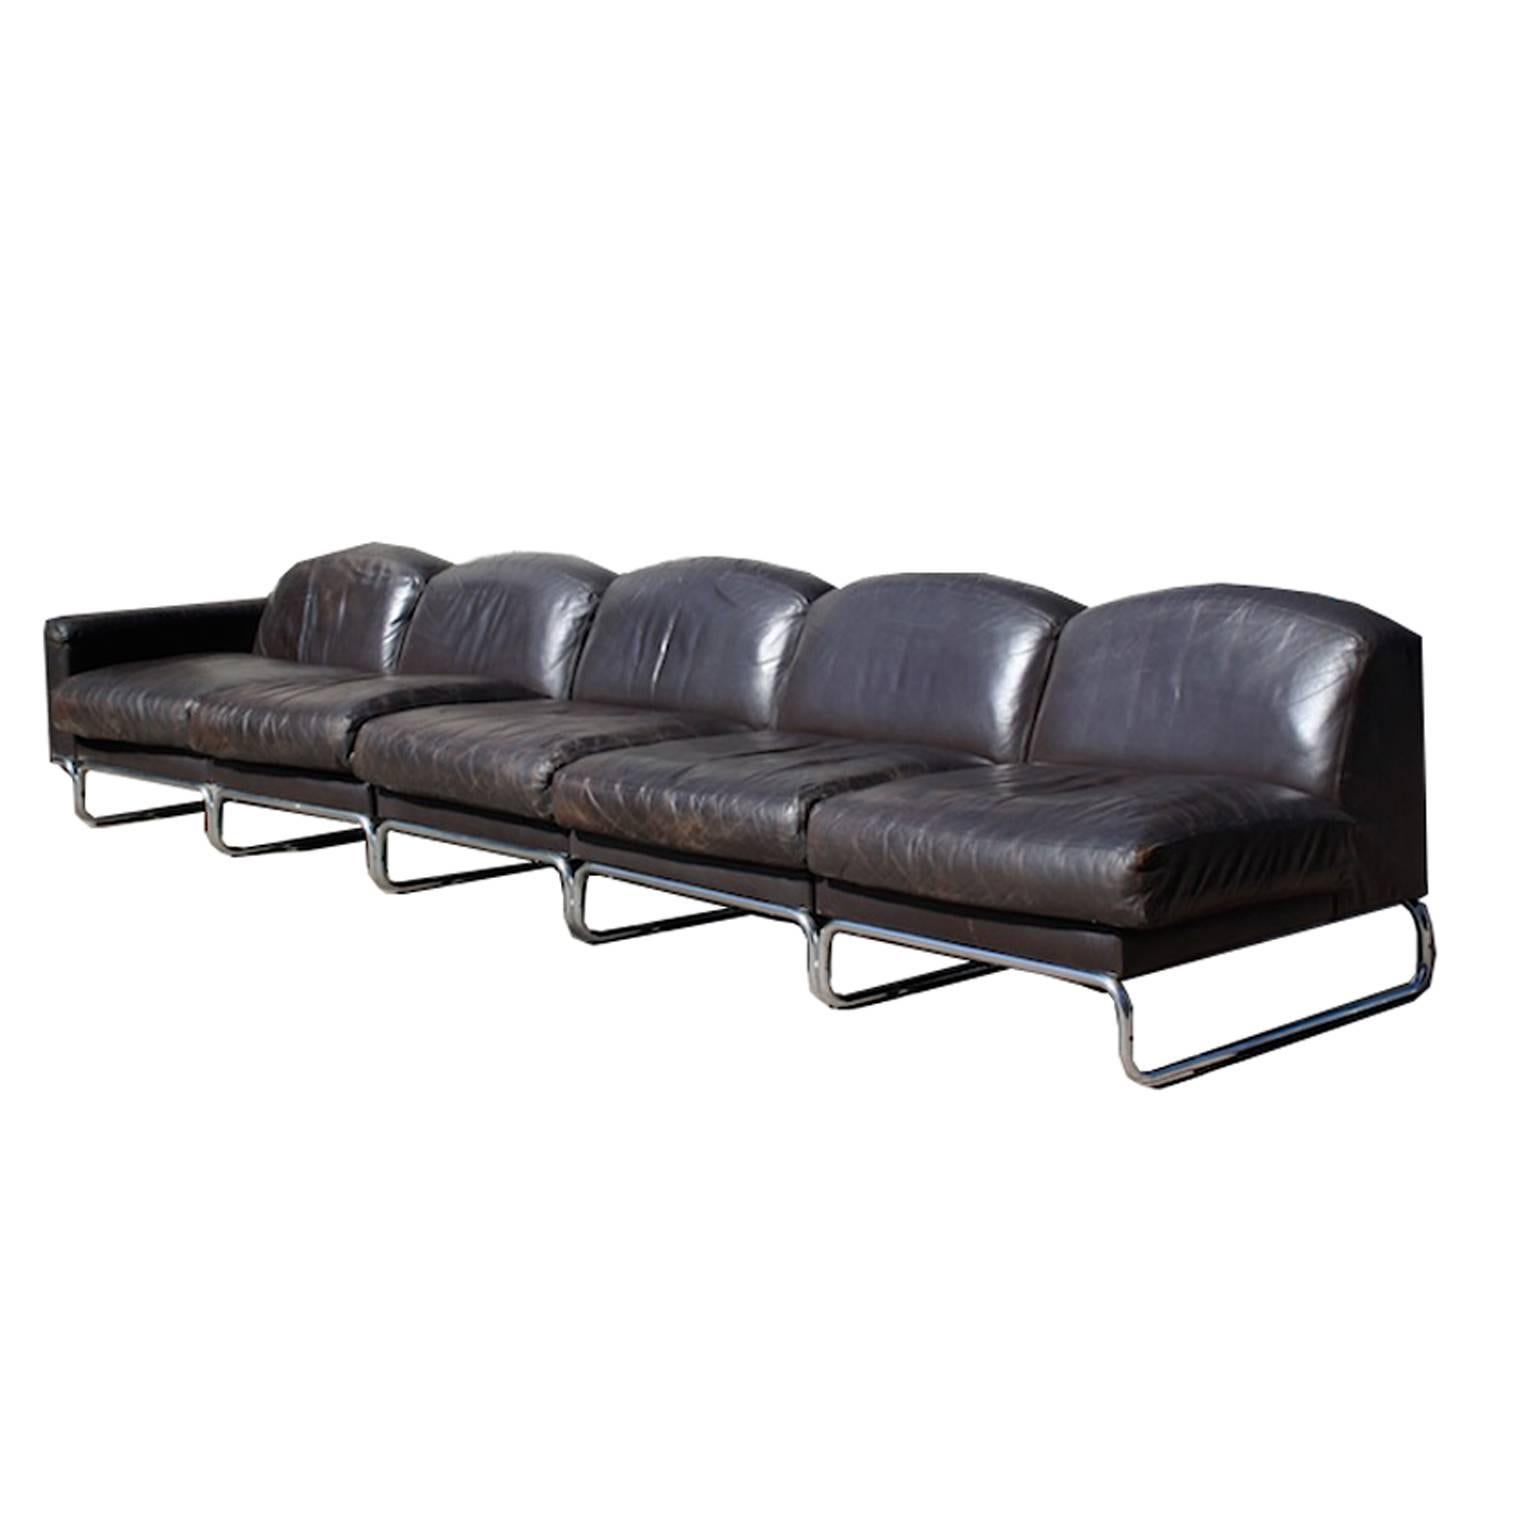 High quality dark brown leather modular sofa on a steel tubular frame by Top form from the 1970s.

Elements can be attached to each other. One element has an armrest. Comes with matching tubular steel magazine stand.

Sofa is in good condition